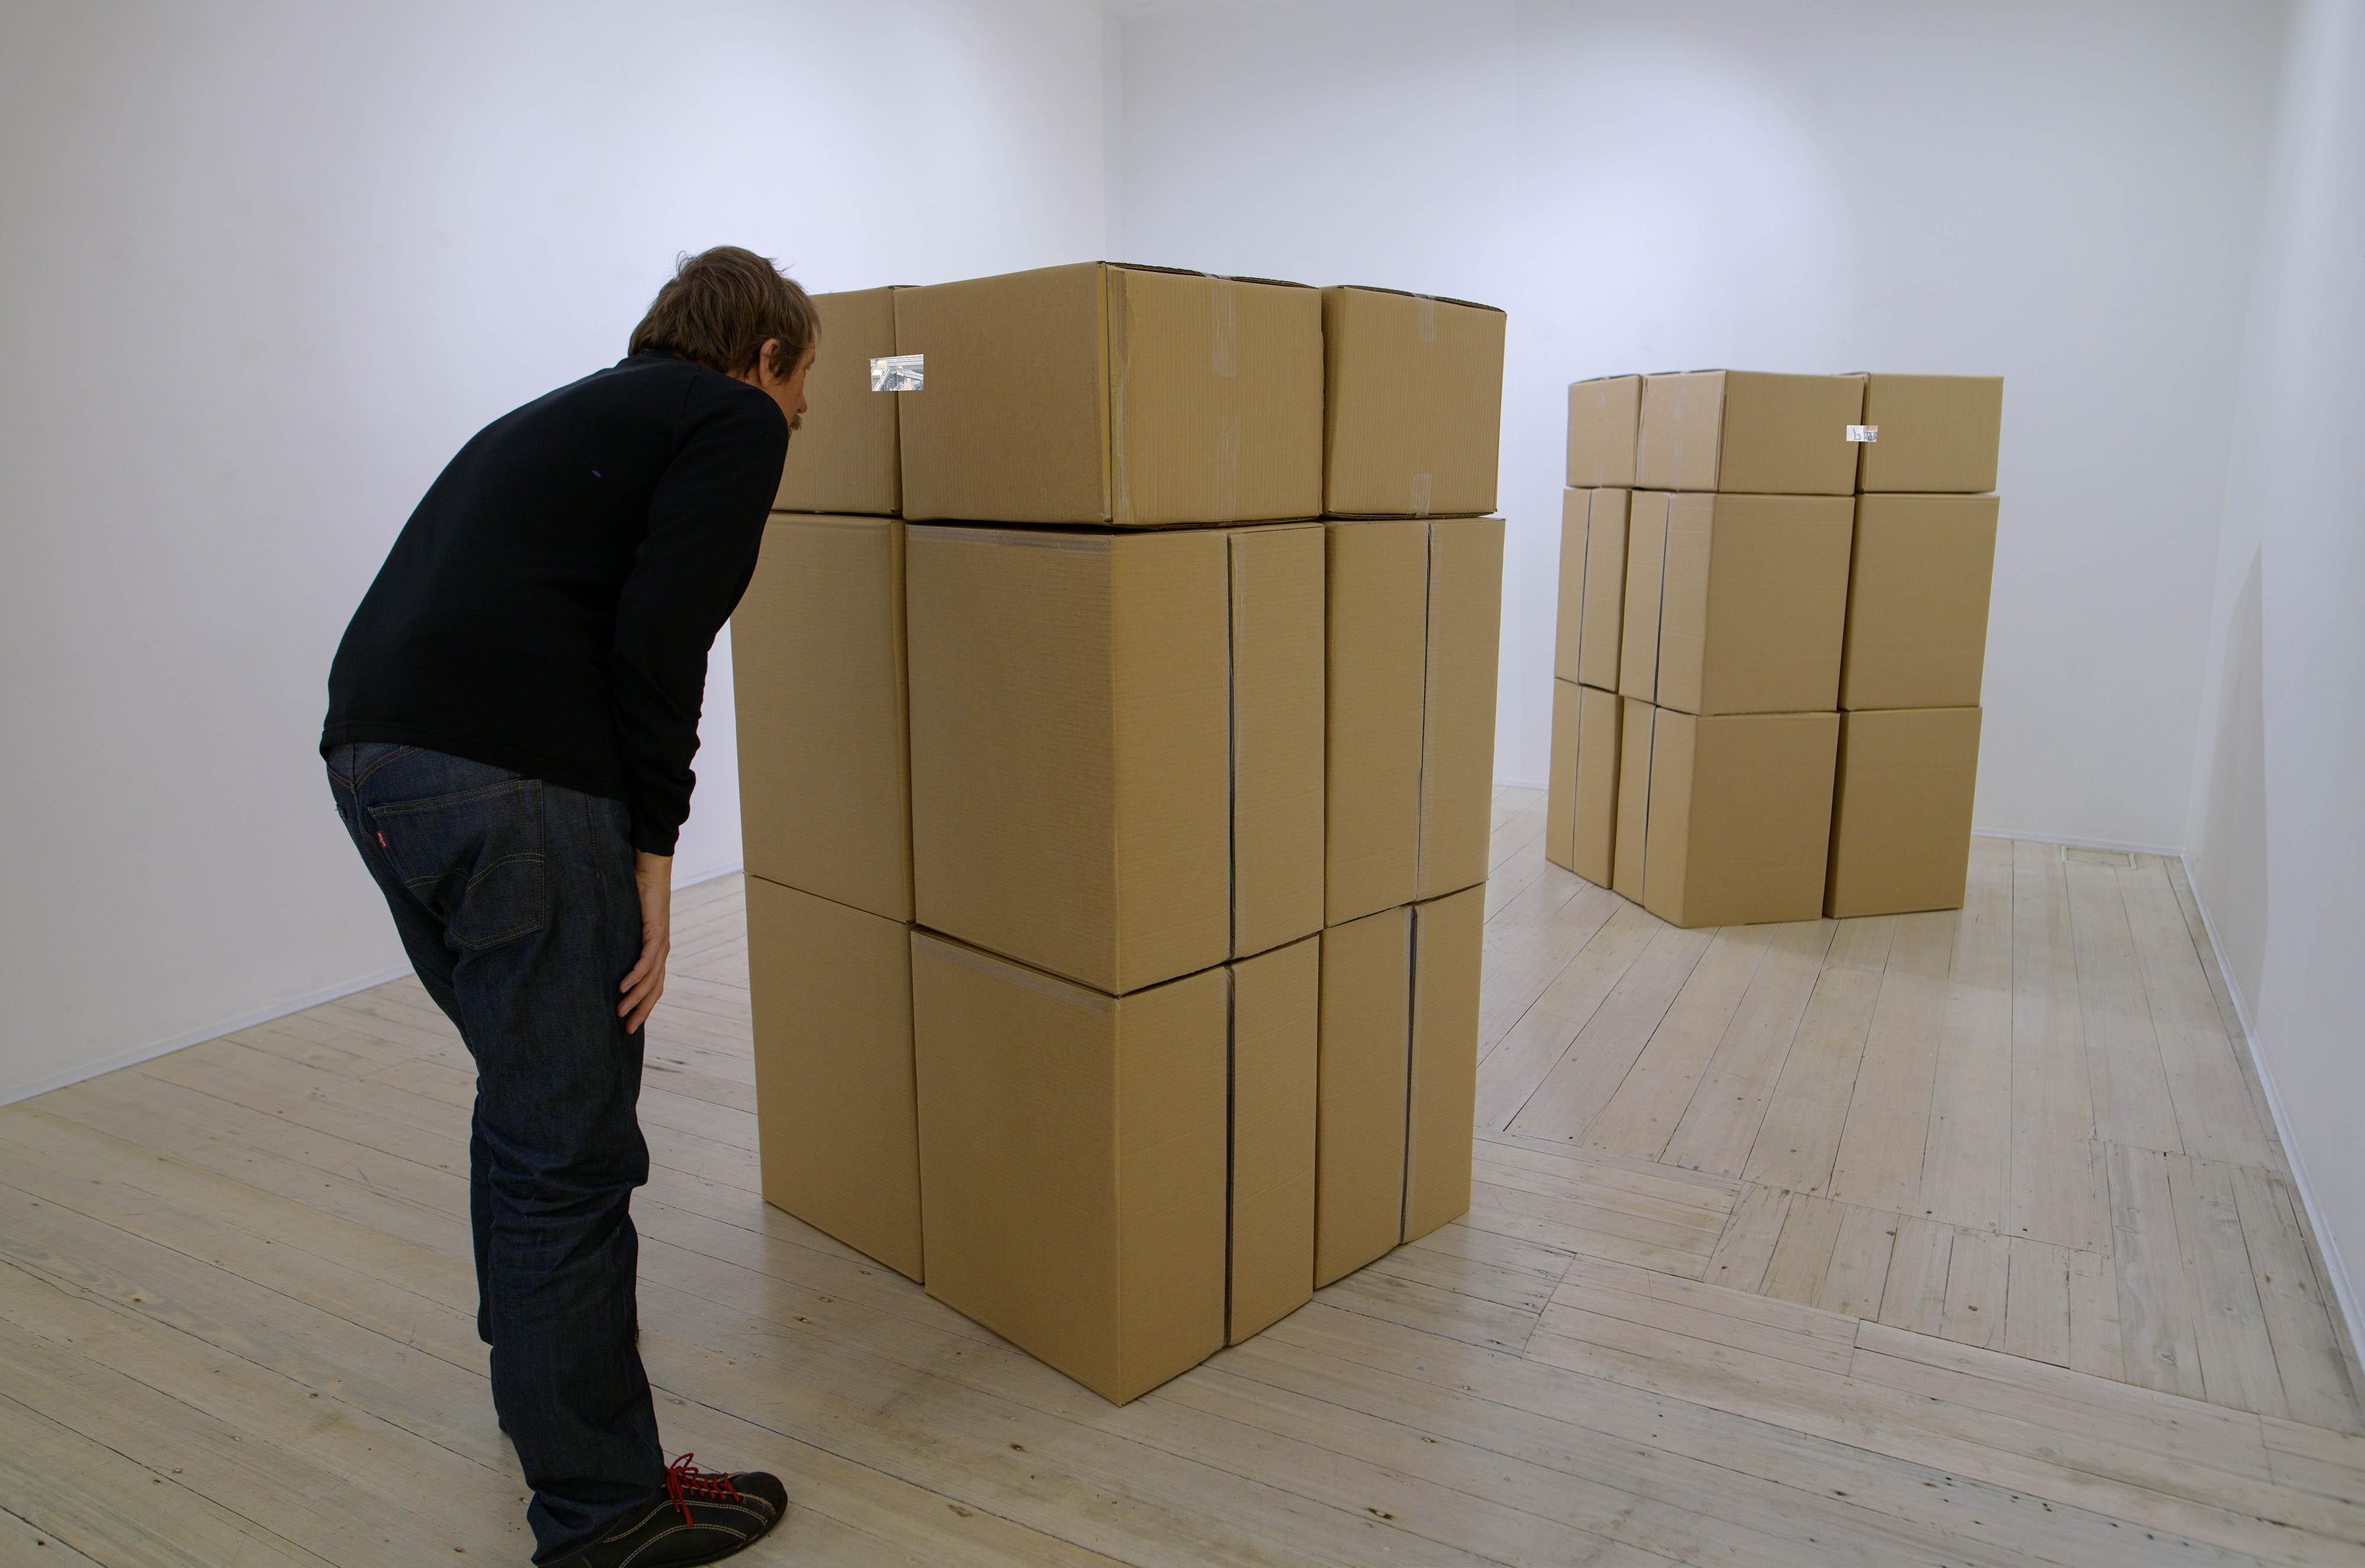 Two large stacks of plain brown cardboard boxes in a gallery space. There is a man dressed in dark clothing bending slightly to look into a small window at the top of the stack closest to the camera.